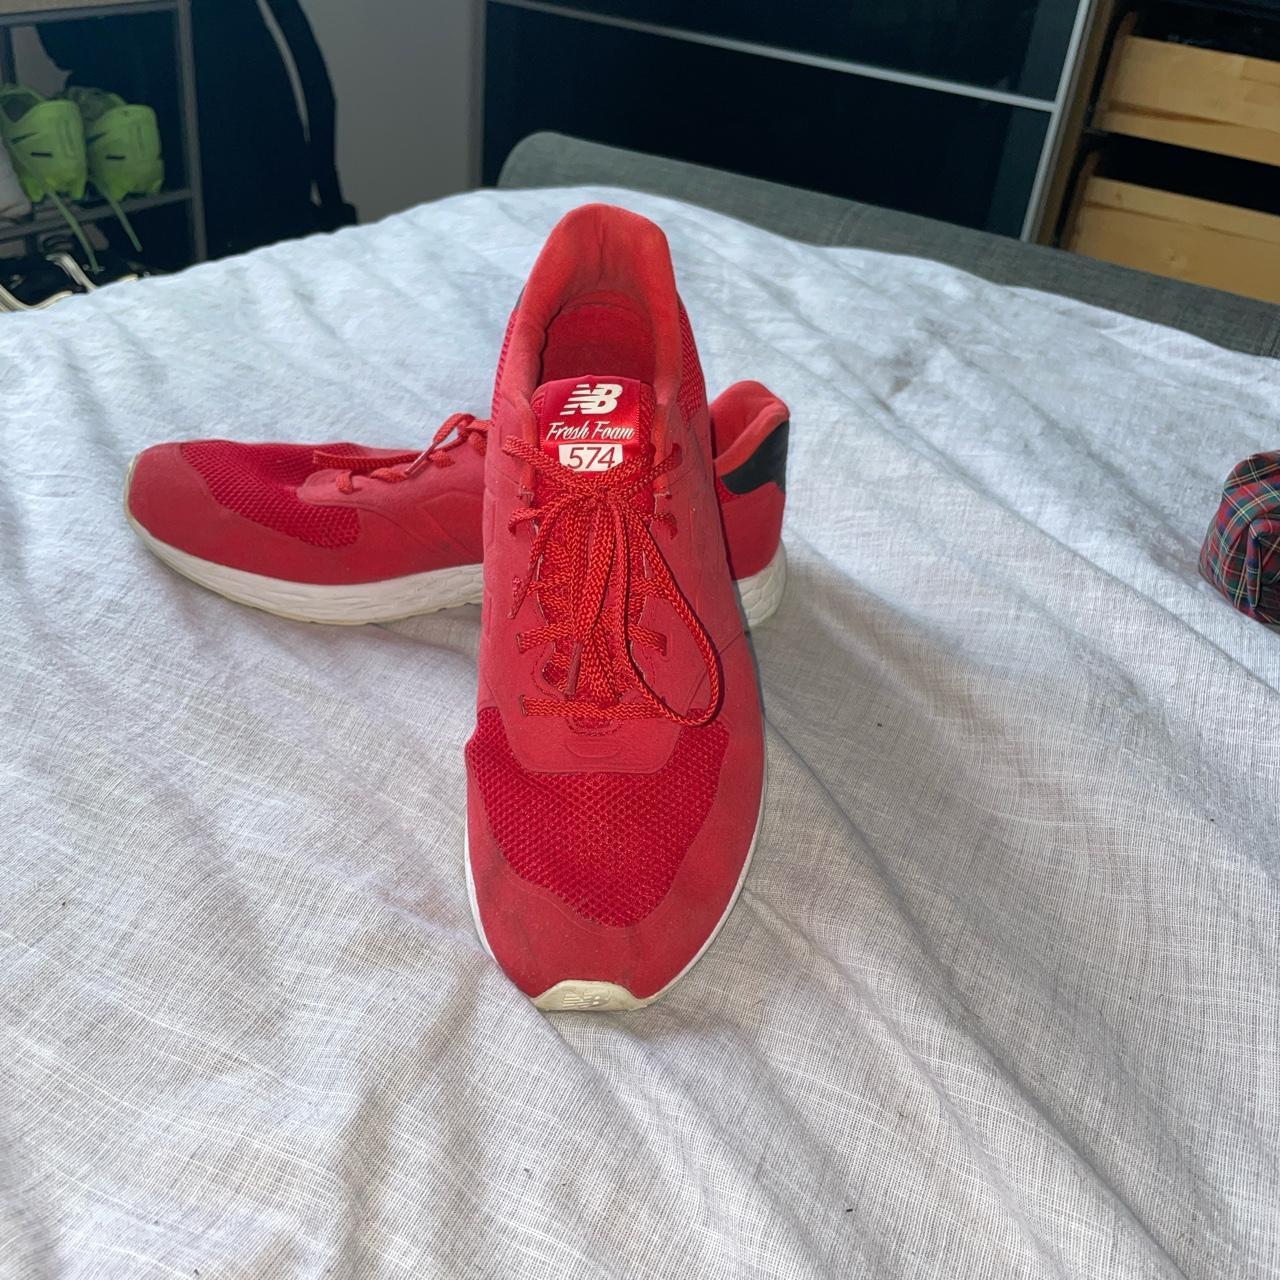 New Balance Men's Red Trainers | Depop